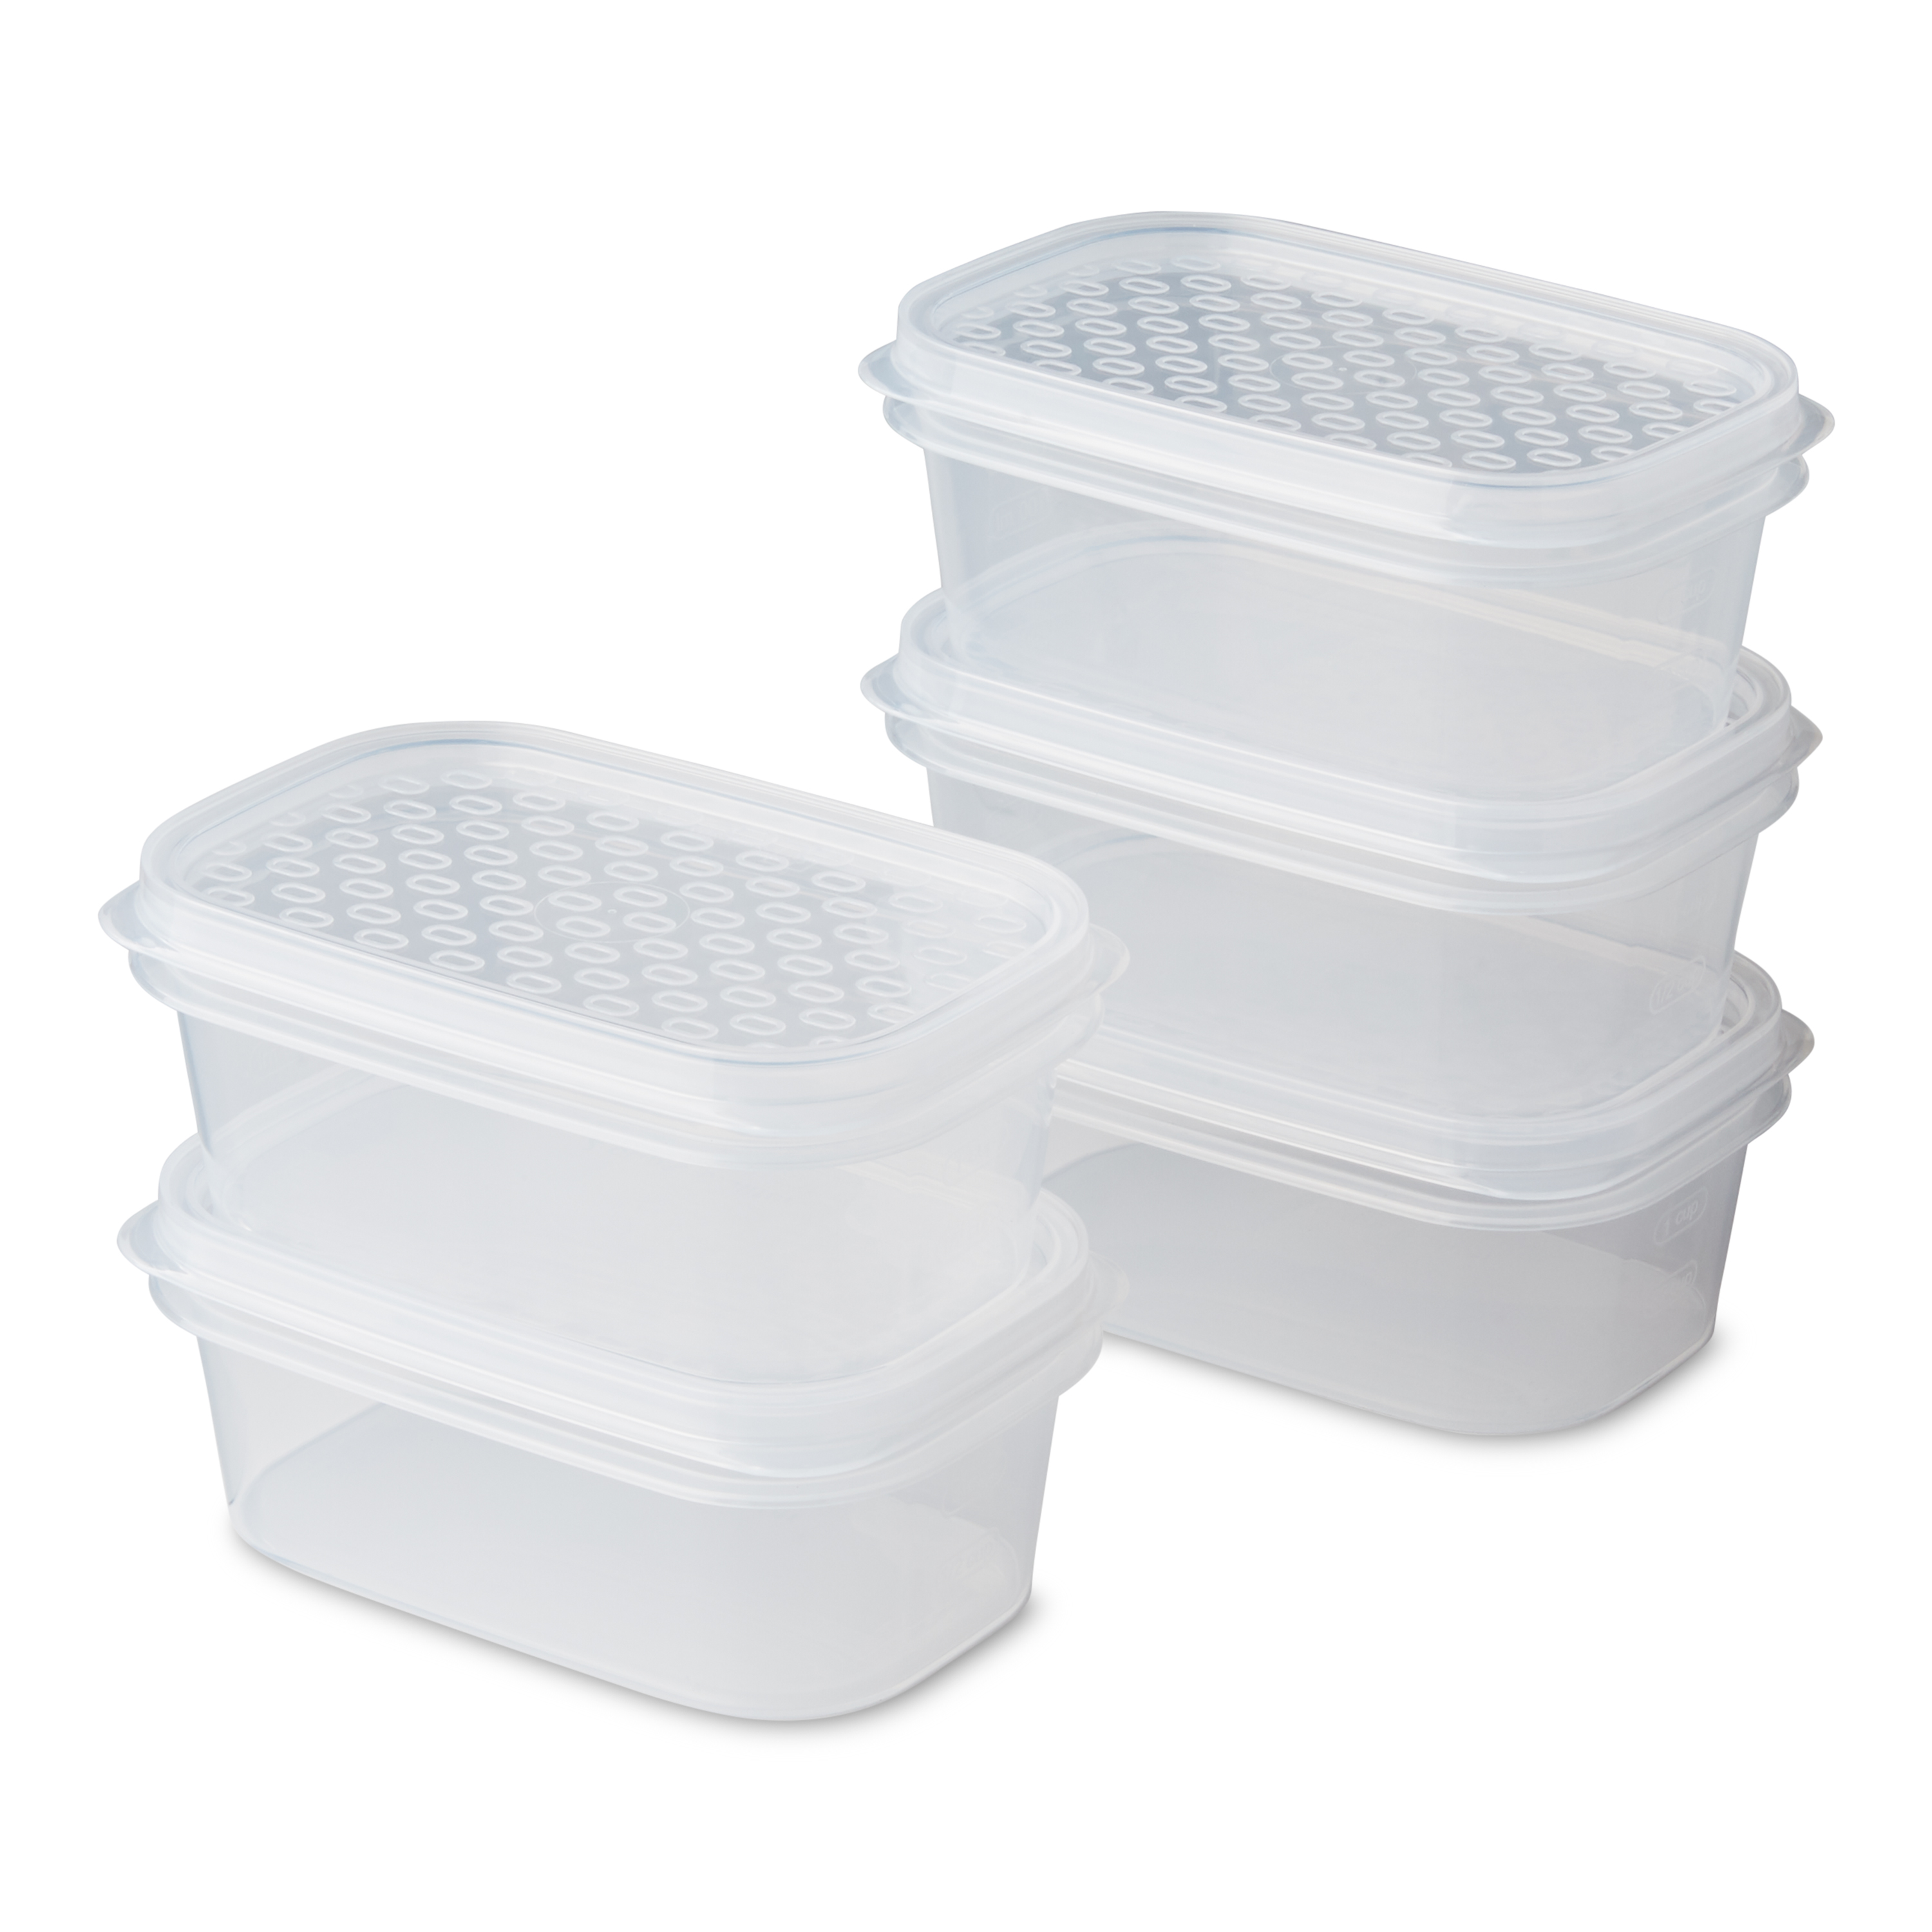 12 Pc Plastic Containers Storage Boxes /& Lids Stack /& Store Food Saver Lunch Tub